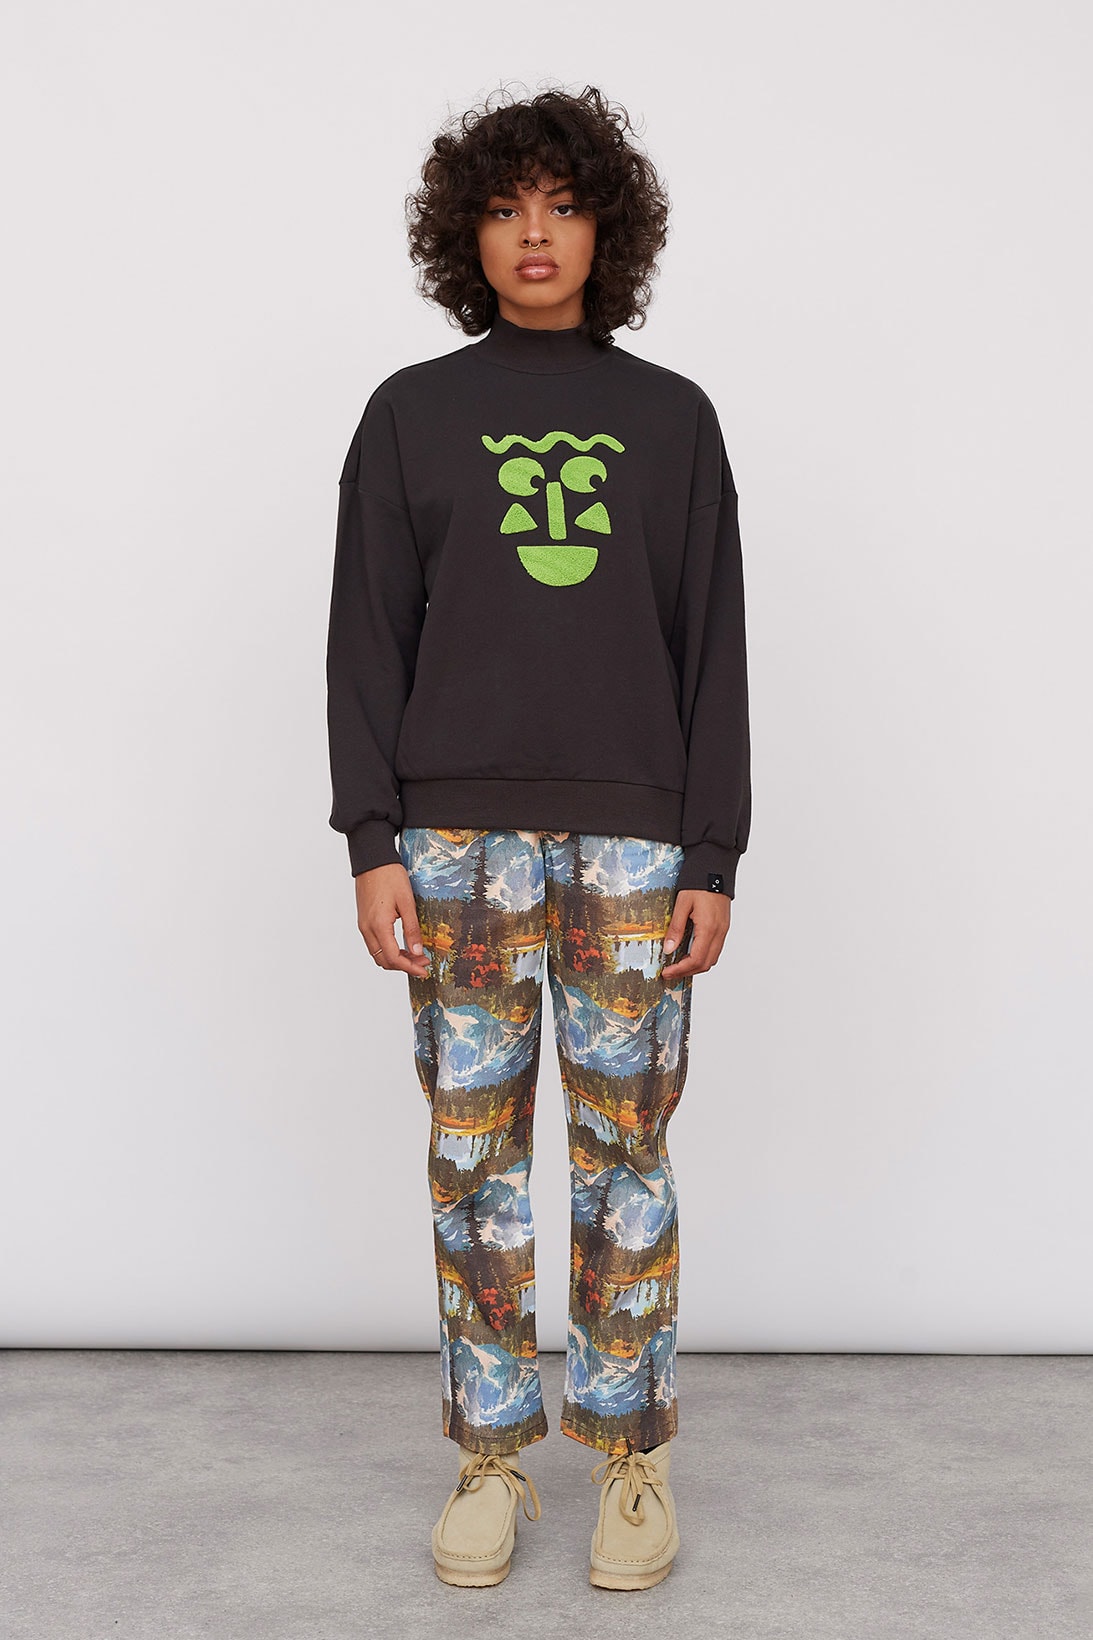 Lazy Oaf Take A Hike Outdoor Hiking Collection Lookbook Smiley Face Sweater Pattern Trousers Clarks Wallabee